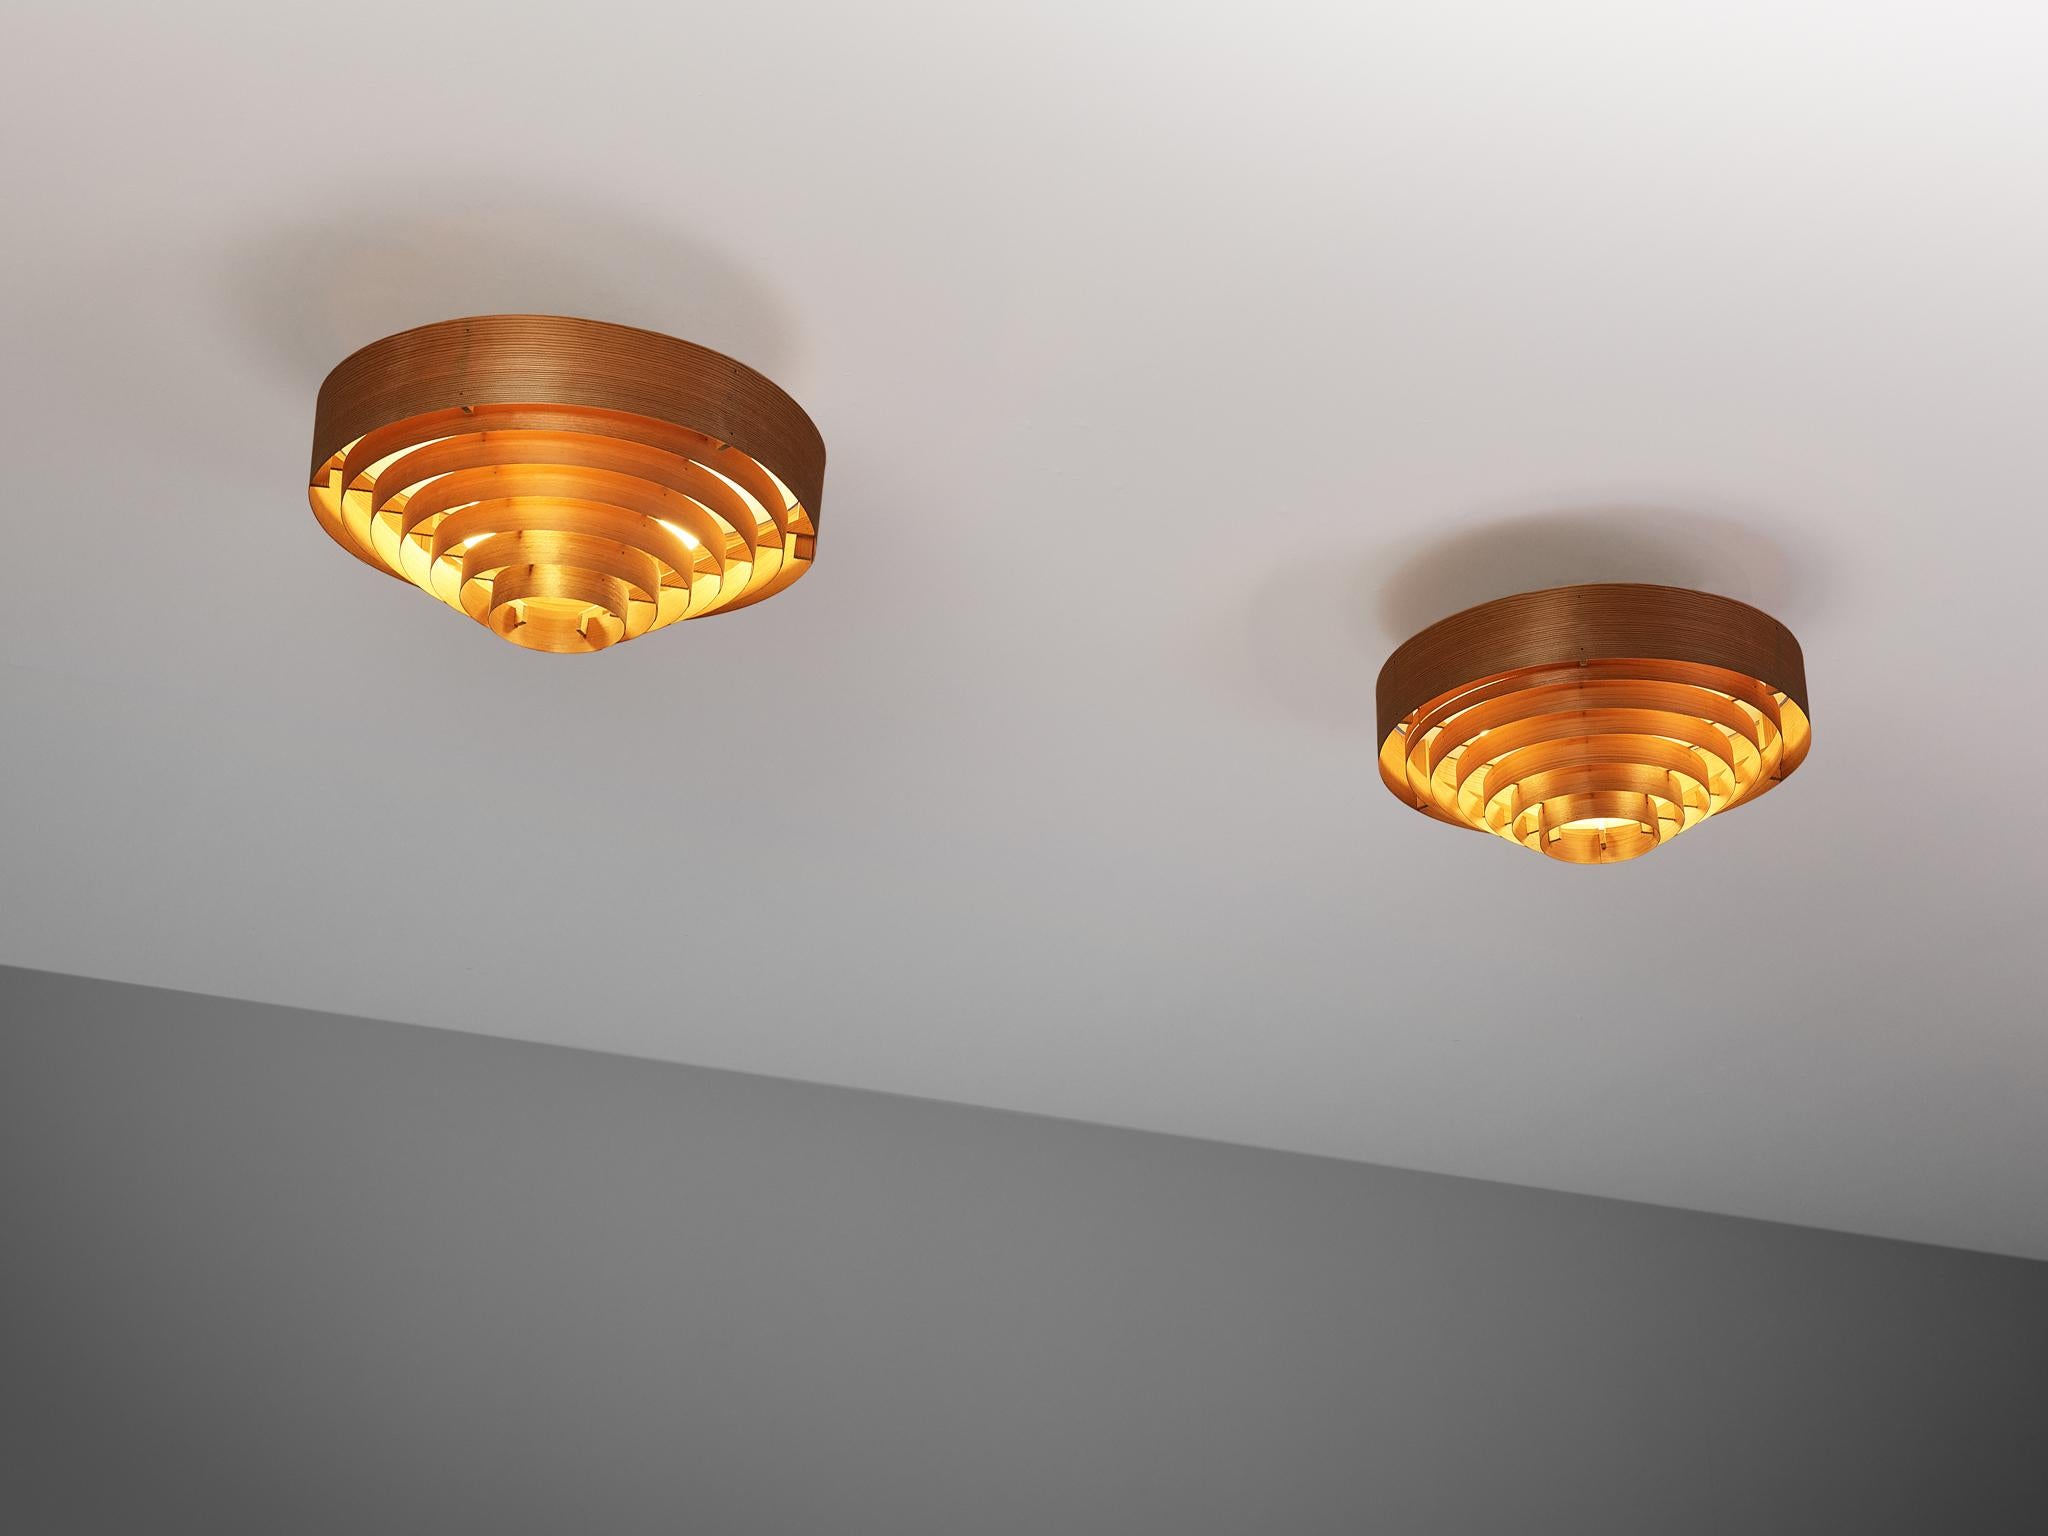 Hans-Agne Jakobsson for Markaryd, ceiling lights, pine, Sweden, 1960s

This set of three ceiling lights is designed by Hans-Agne Jakobsson. The lamps have an organic and at the same time abstract tendency. The lamp is constructed out of extremely